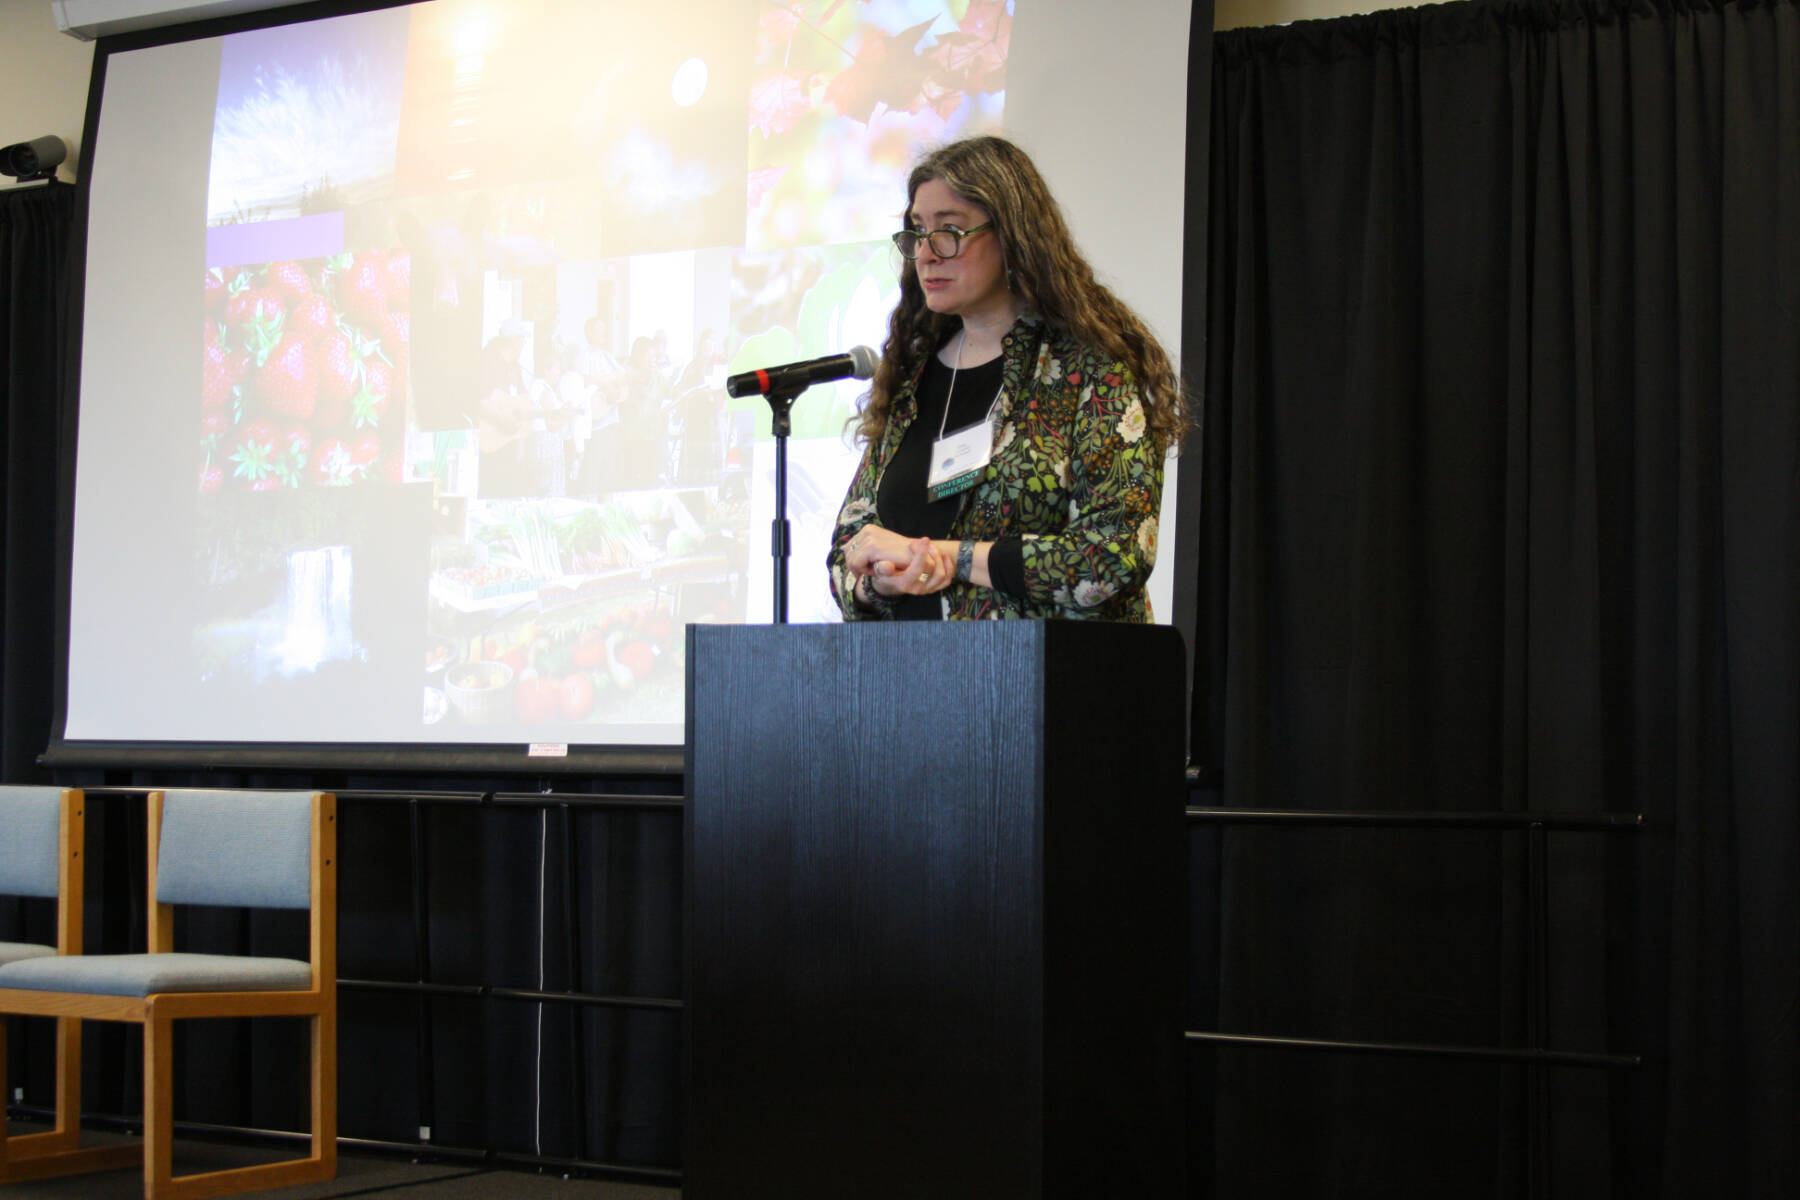 Kachemak Bay Writers’ Conference director Erin Hollowell welcomes conference attendees and faculty on Saturday, May 13, 2023 at Kachemak Bay Campus in Homer, Alaska. Photo by Delcenia Cosman